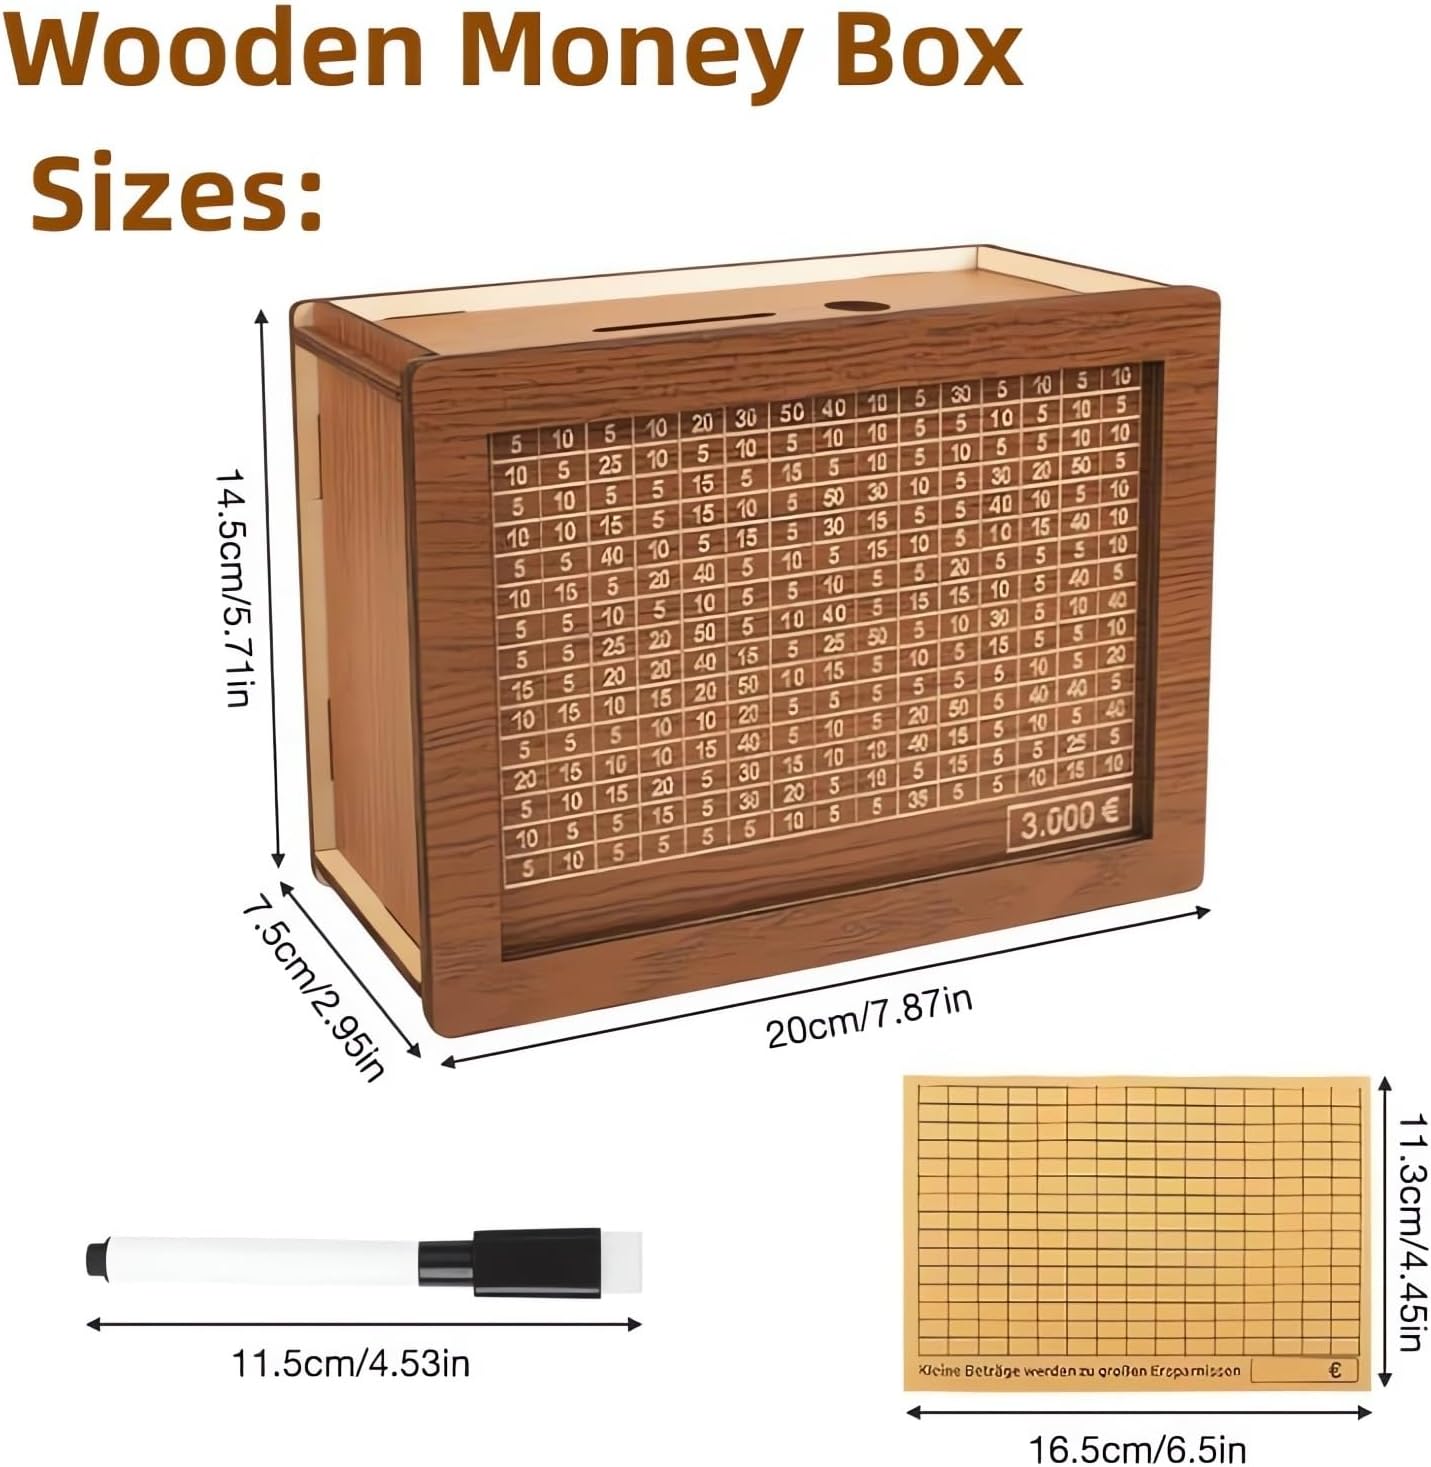 Wooden Money Box with Savings Target and Numbers, Reusable Money Saving Box for Cash, Savings Challenges Box w/Counter Crafts, Portable Storage Case Money Saving Box for Kids Adults (Dollars, 10000)